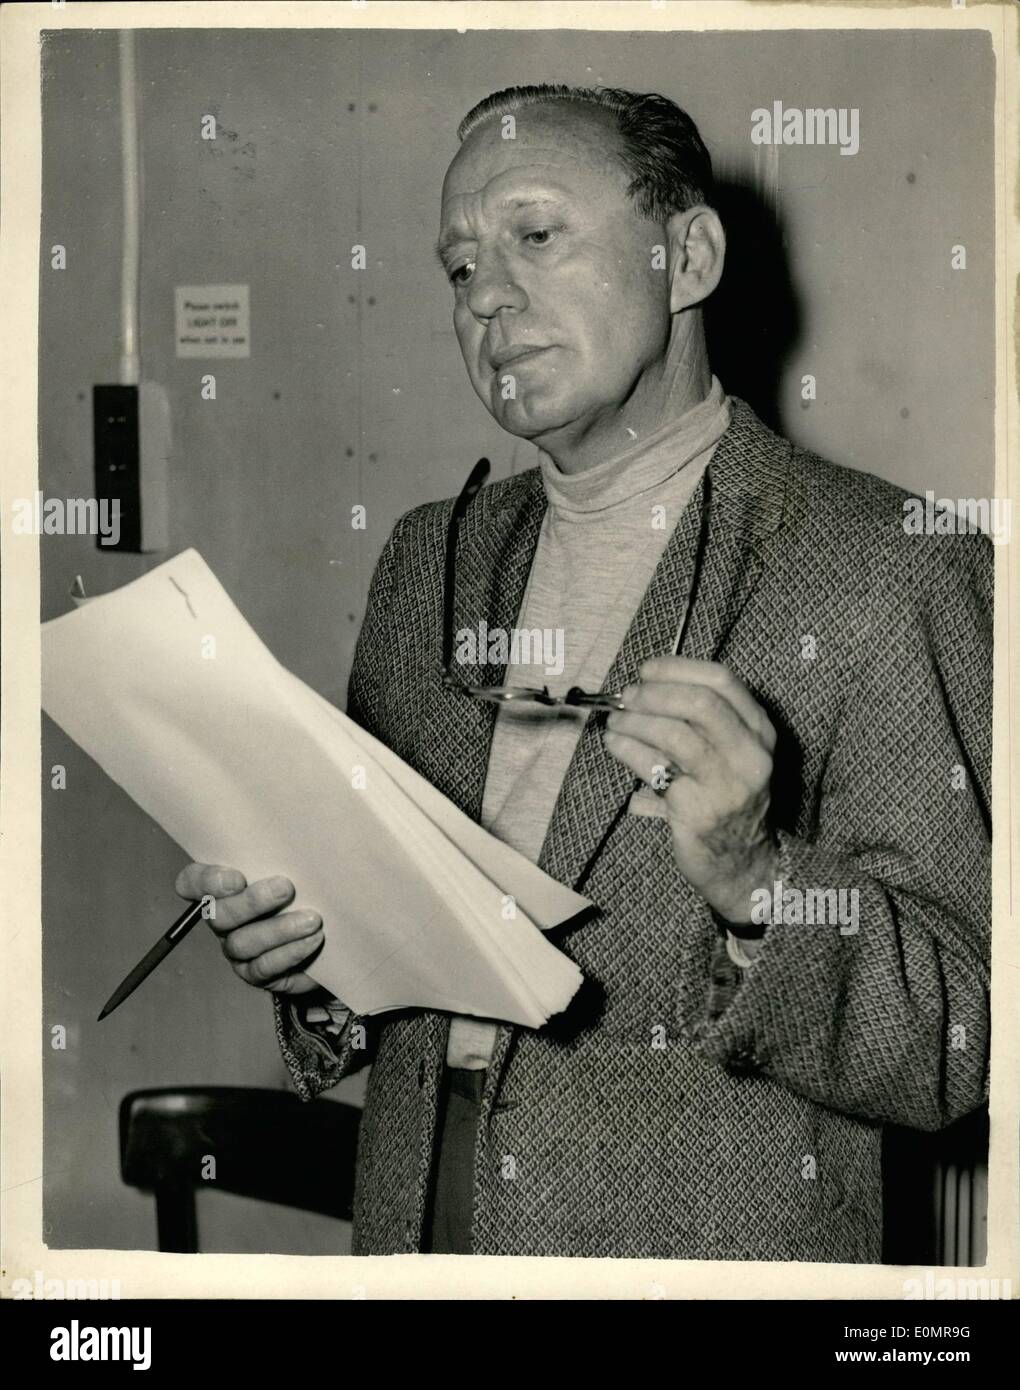 May 05, 1956 - Jack Benny rehearses for B.B.C. television show.... Popular American Comedian Jack Benny was to be seen at white Stock Photo